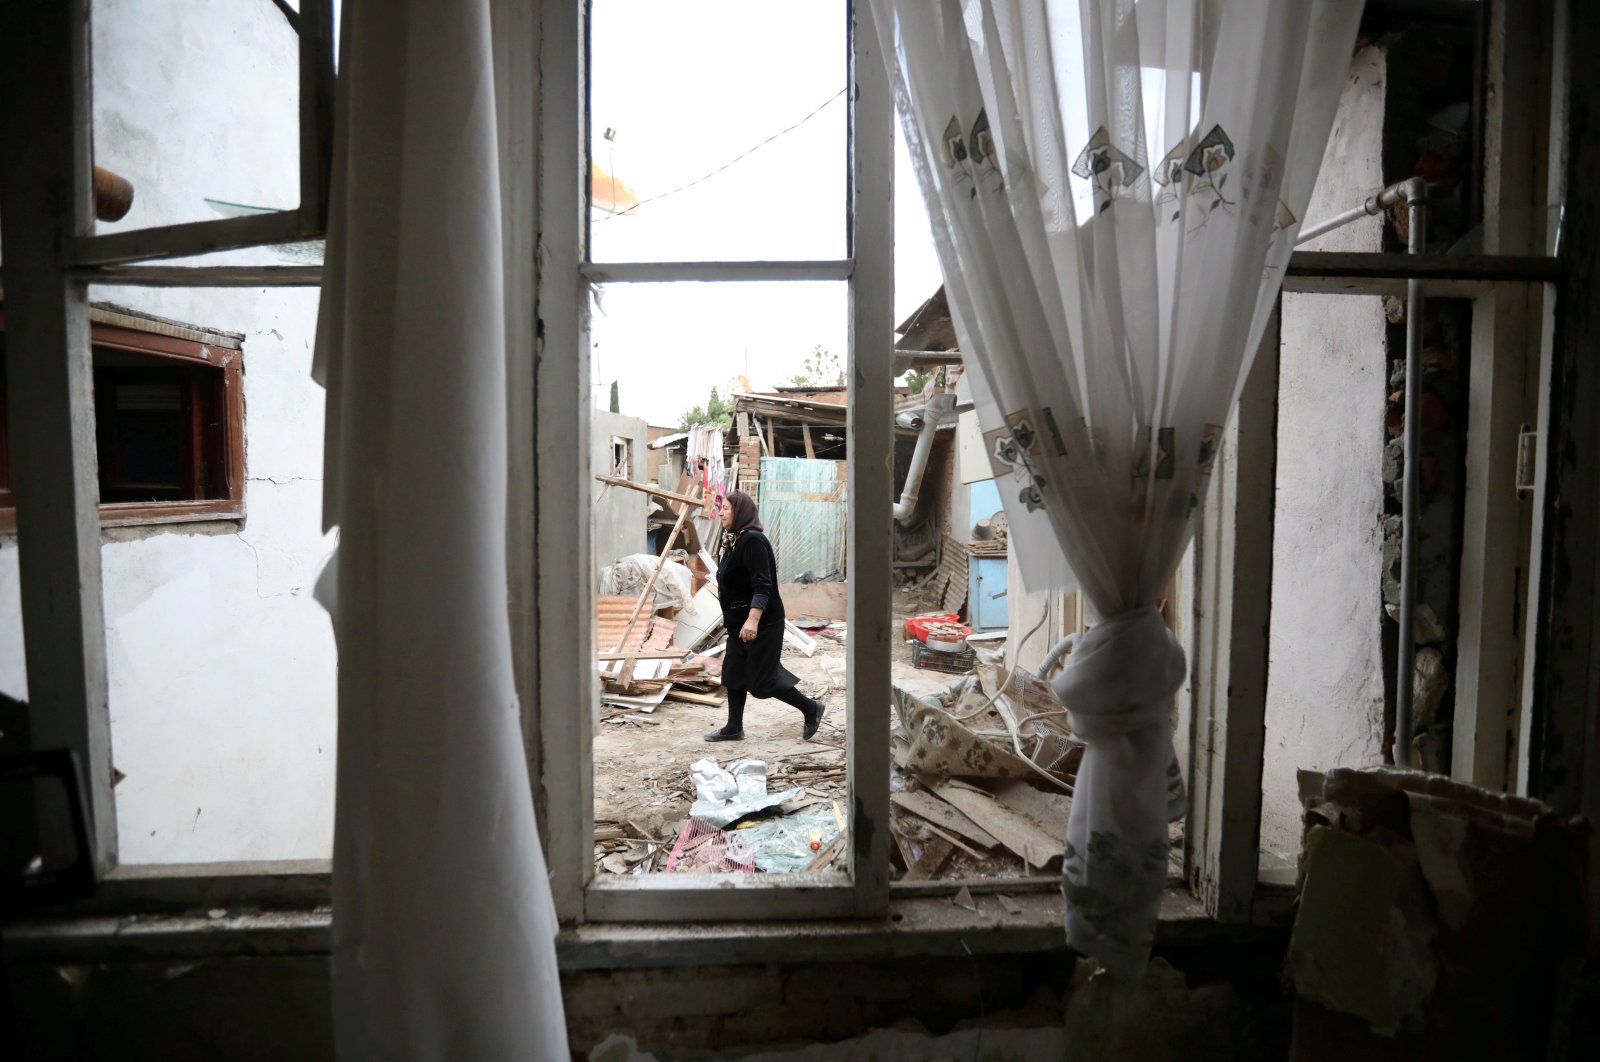 A woman walks past a house damaged by recent Armenian shelling in the city of Ganja, Azerbaijan, Oct. 6, 2020. (Reuters Photo)